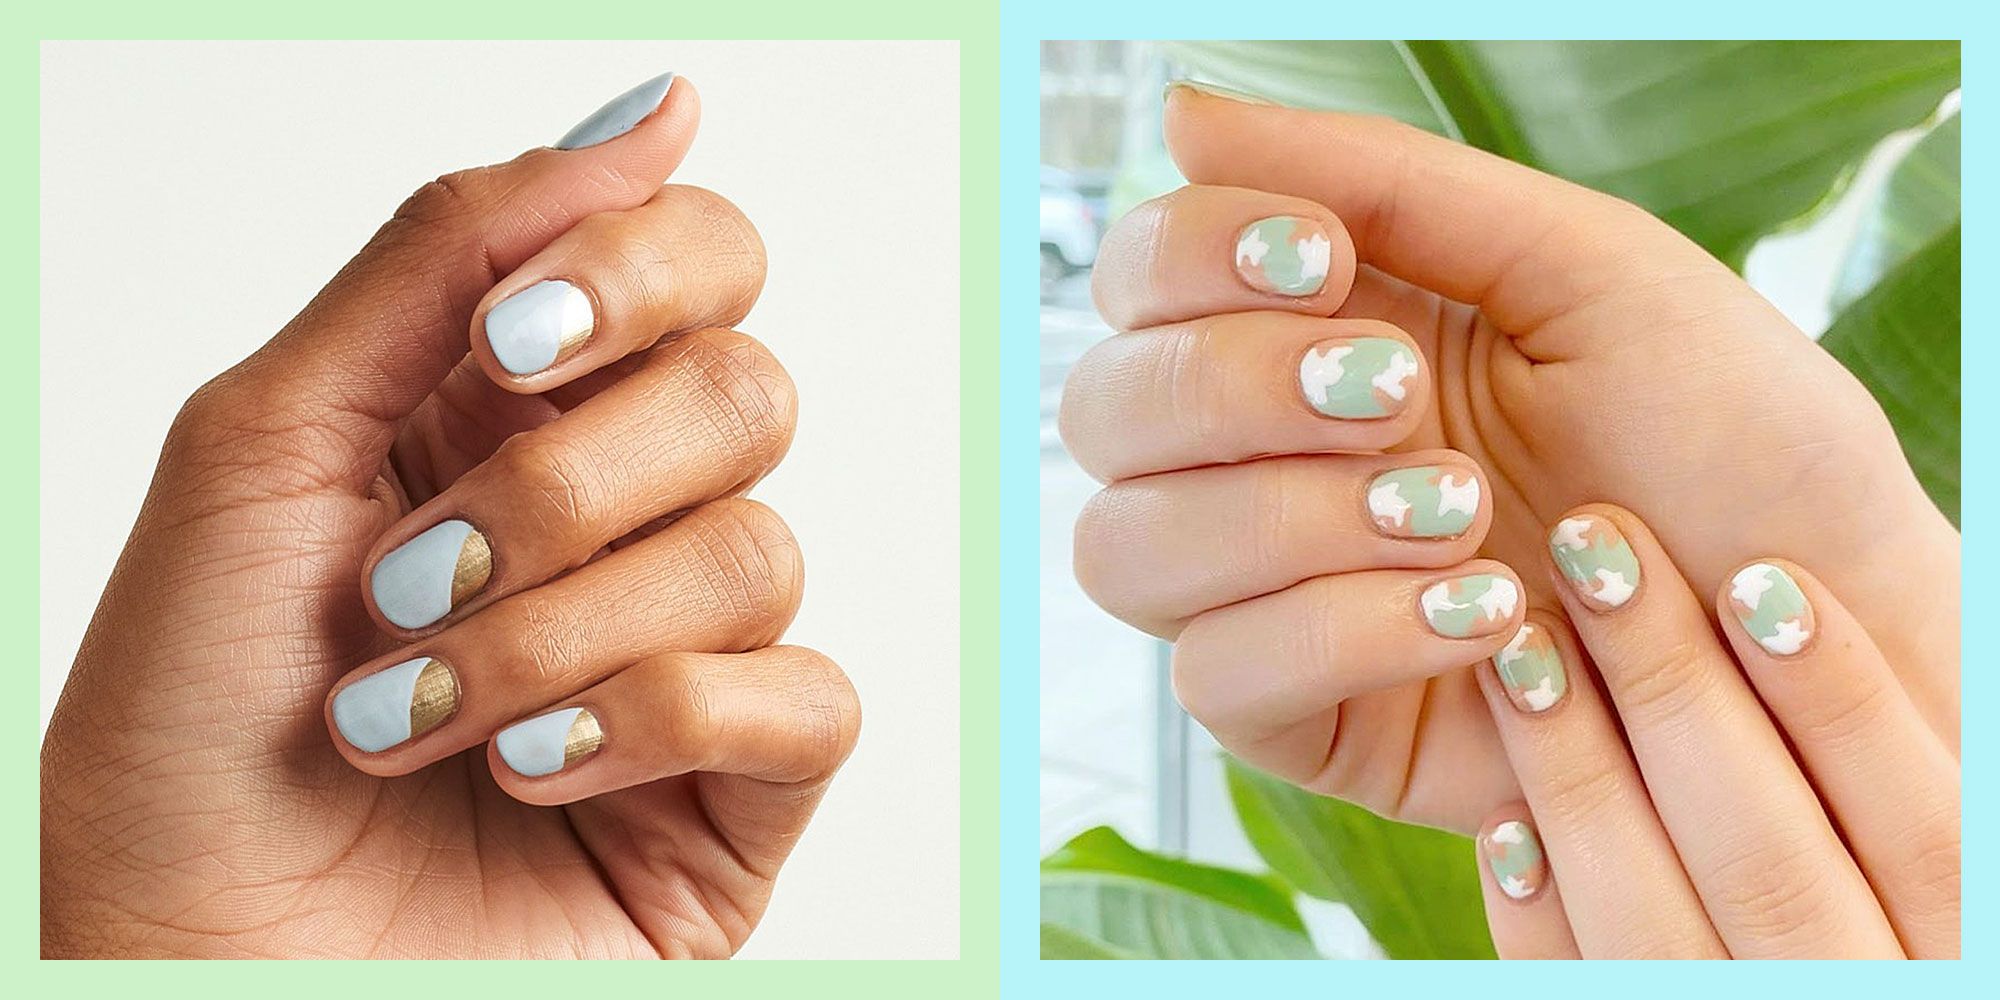 7 Best Nyc Nail Salons In 2020 - Where To Get A Manicure In New York City